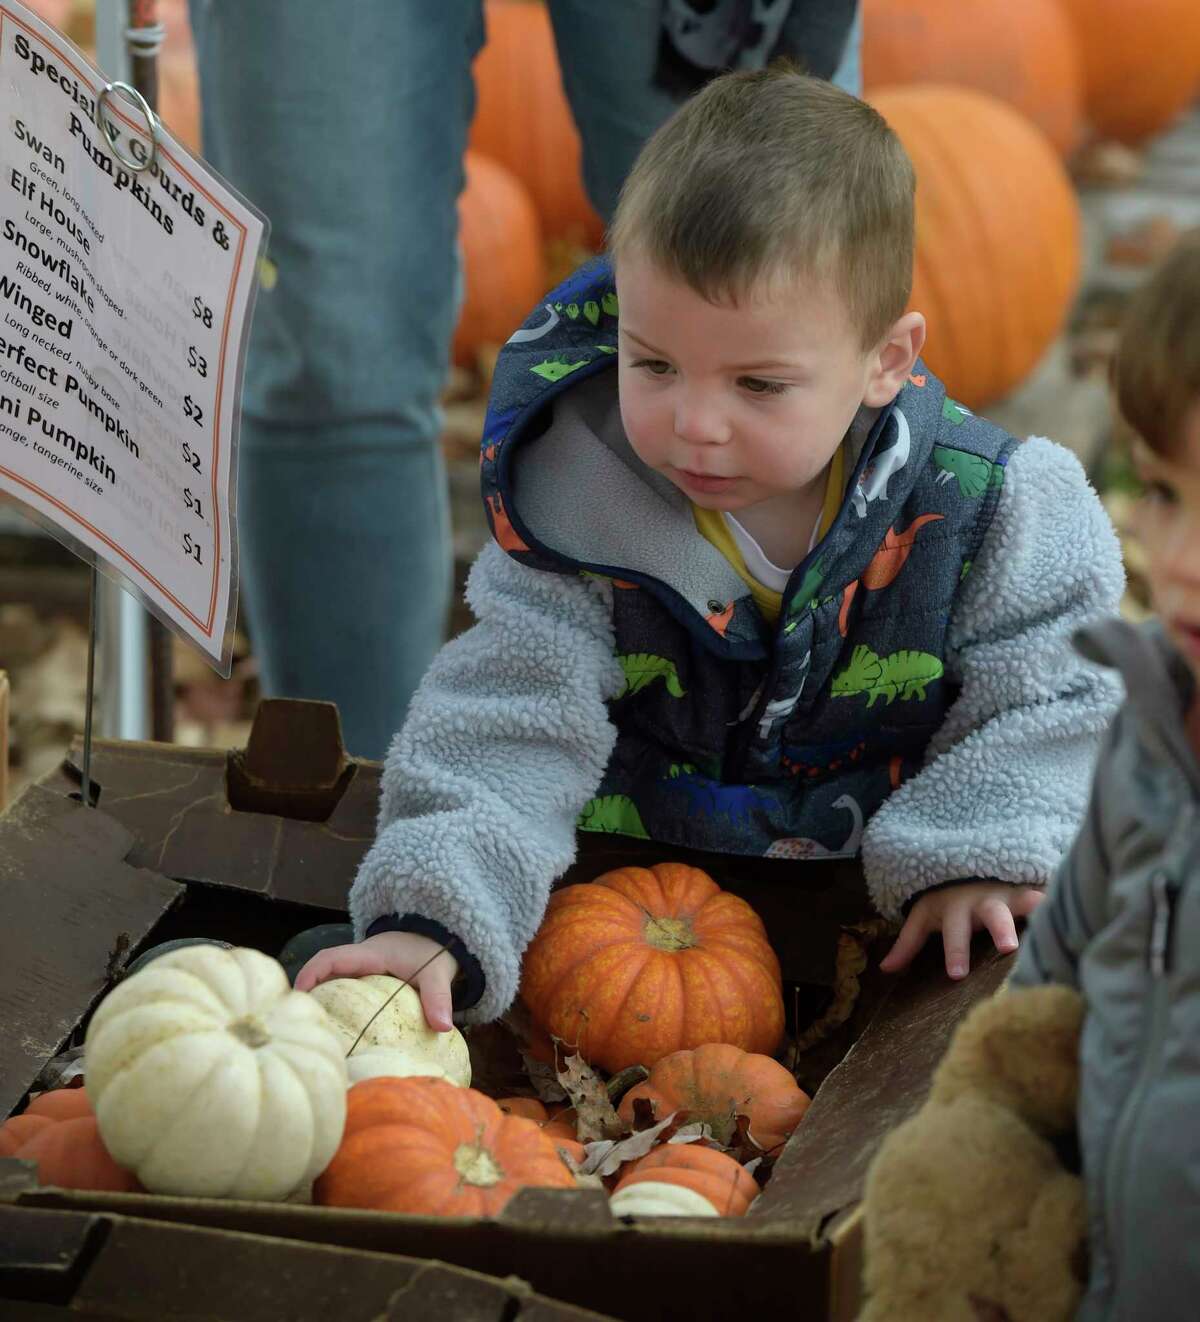 Bennett Early, age 2, looks over pumpkins in the pumpkin patch at Jesse Lee Memorial United Methodist Church. Children from Jesse Lee Day School were exploring the patch on Friday Morning. October 28, 2022, Ridgefield, Conn.